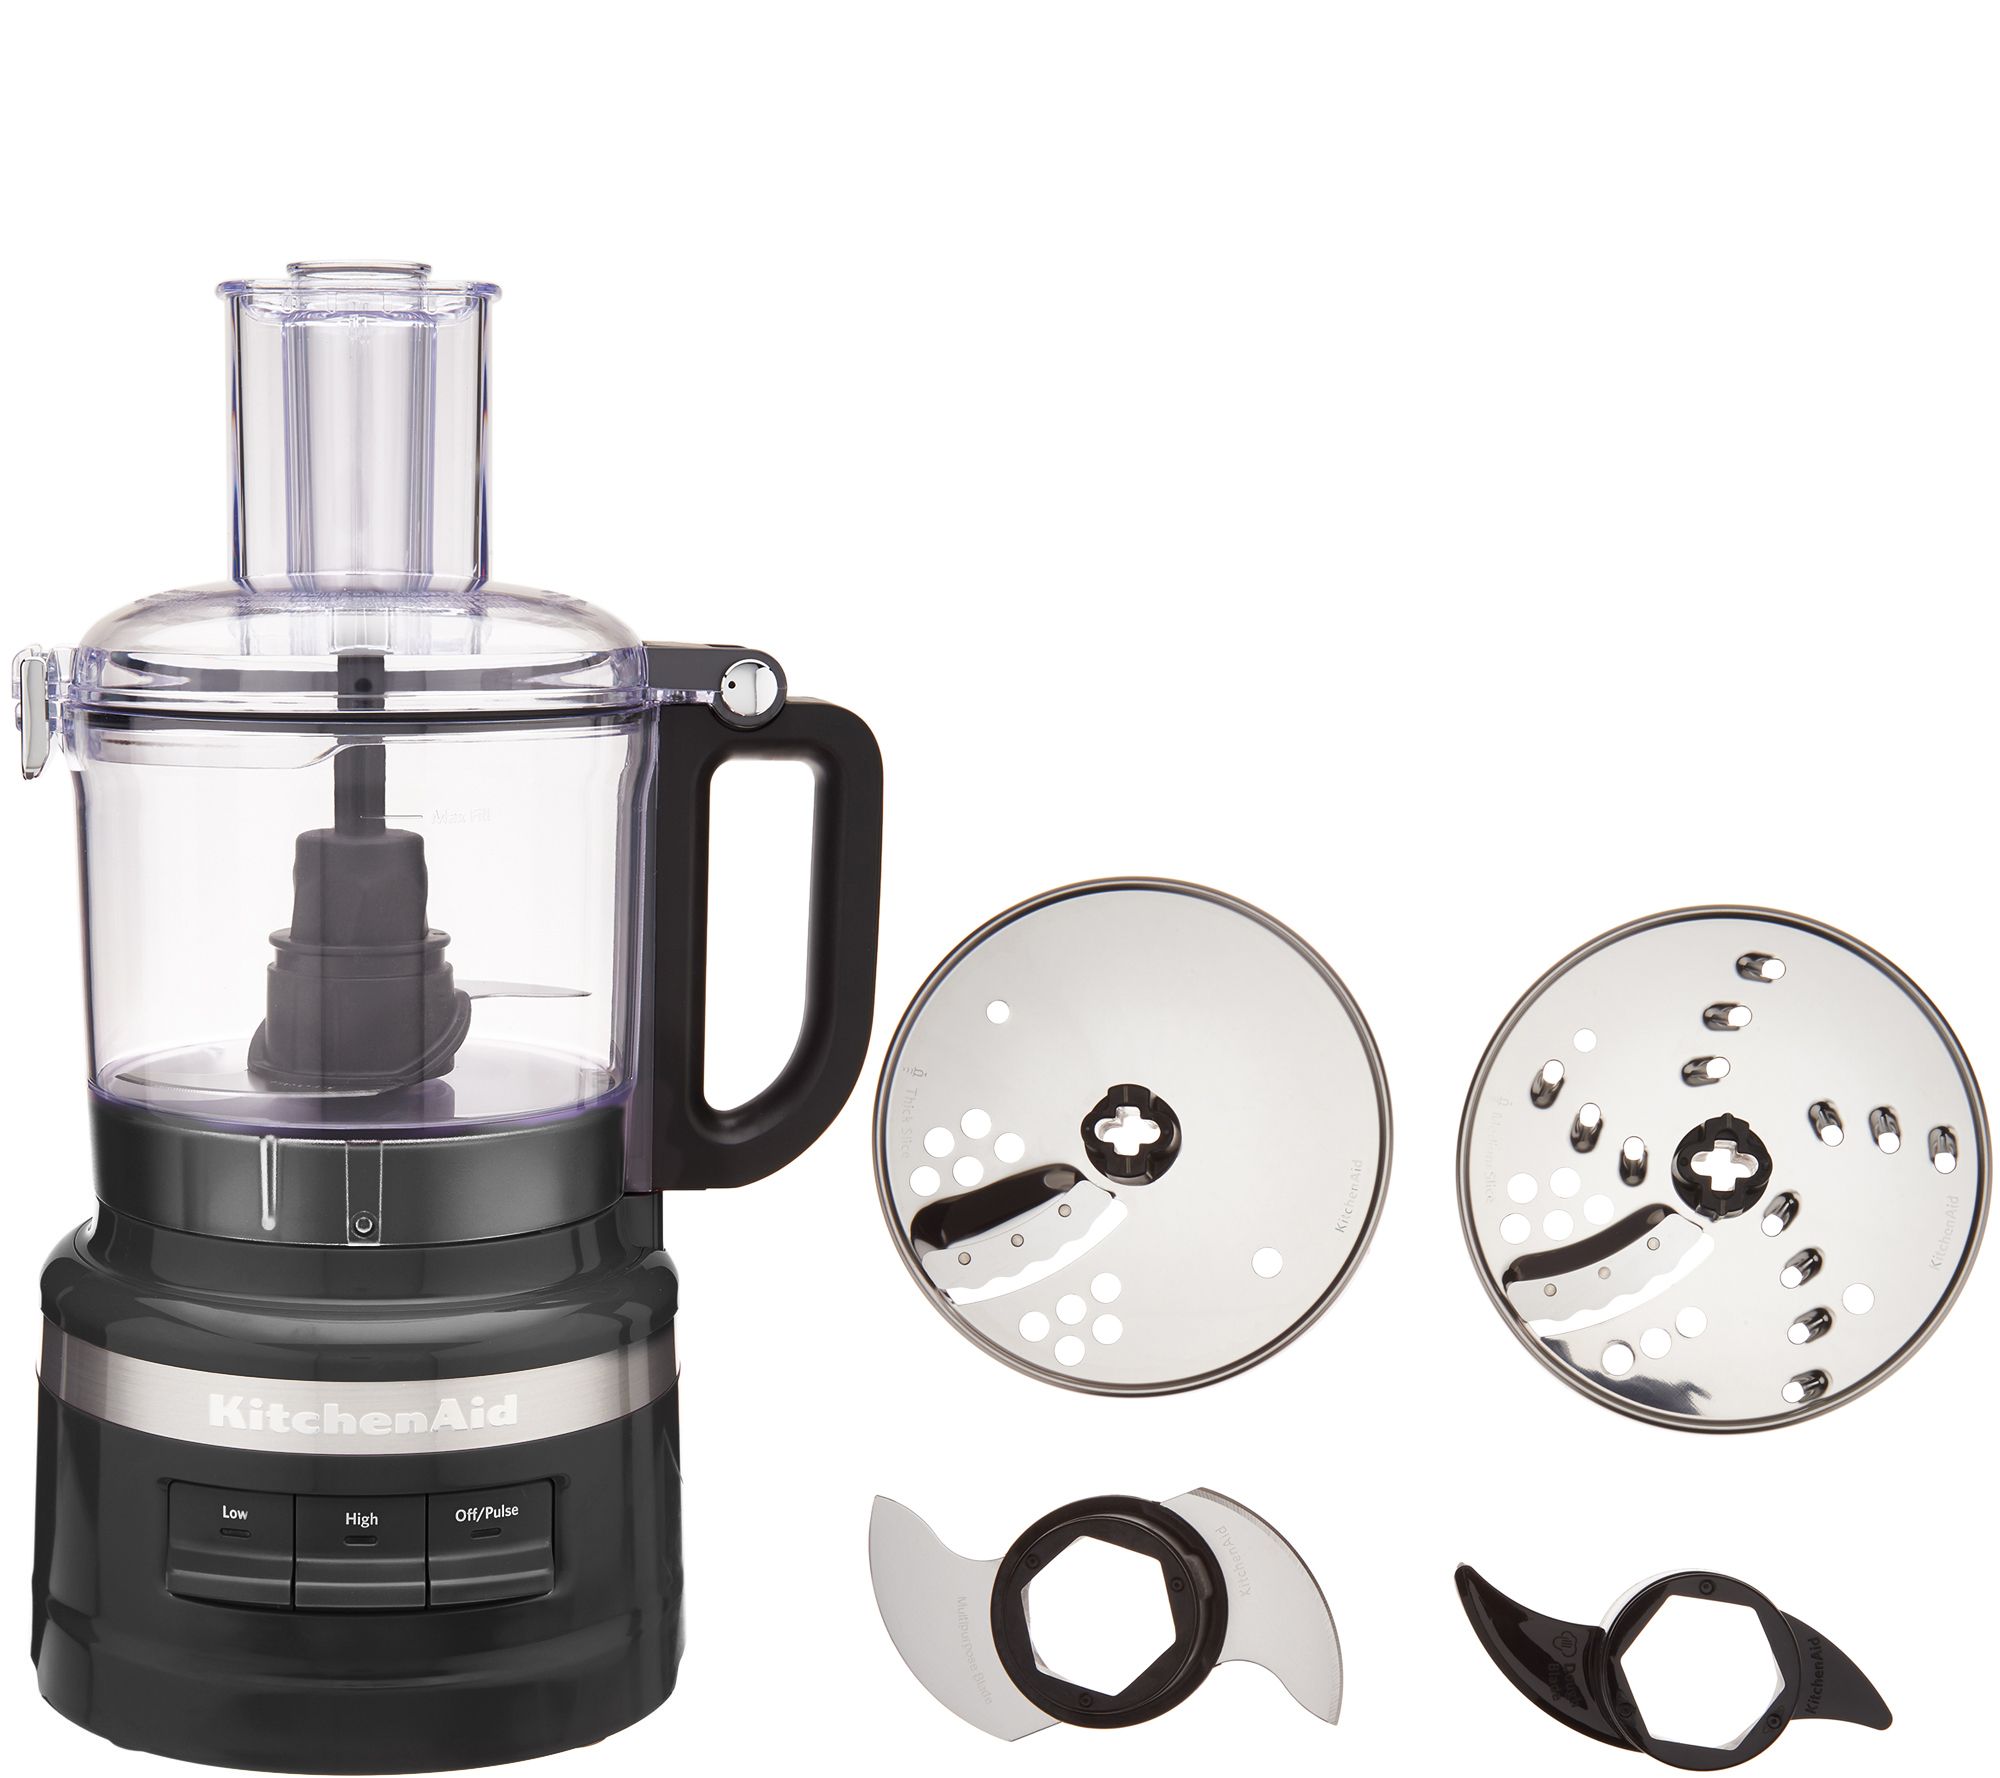 Can a Food Processor Save Me Time in the Kitchen? - JennifersKitchen